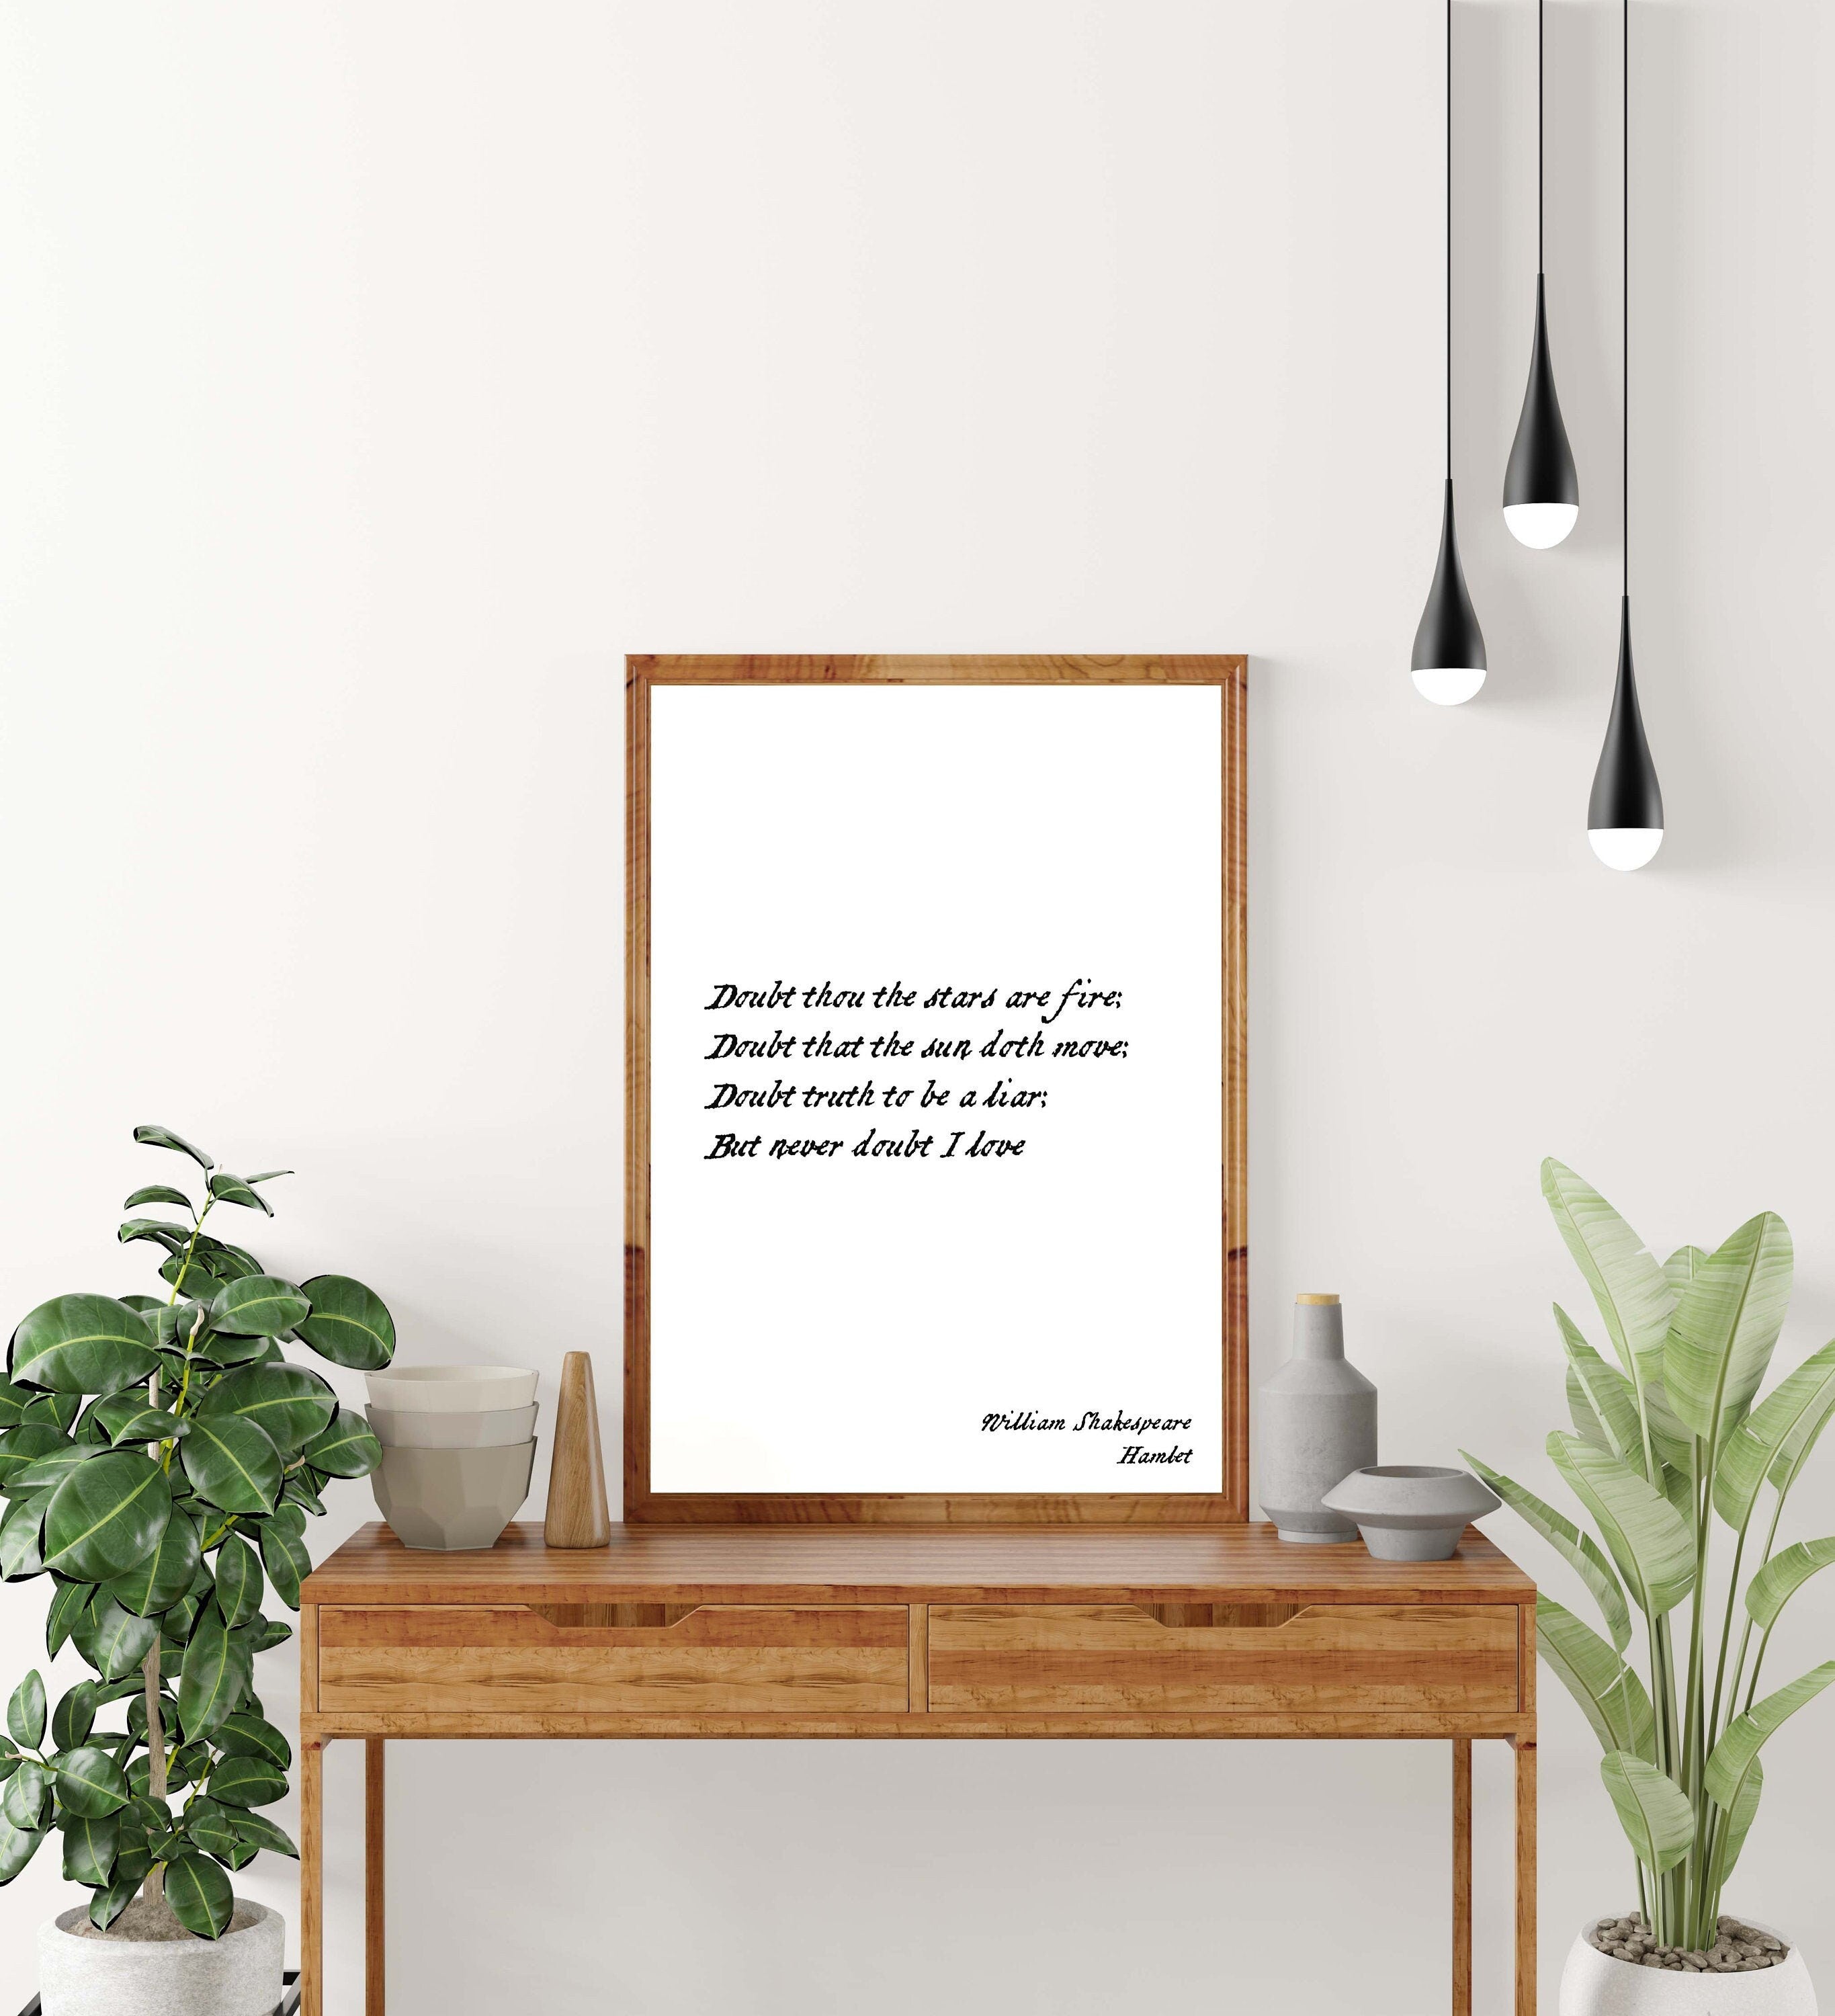 Never Doubt I Love William Shakespeare Quote from Hamlet, Wall Art Prints in Black & White